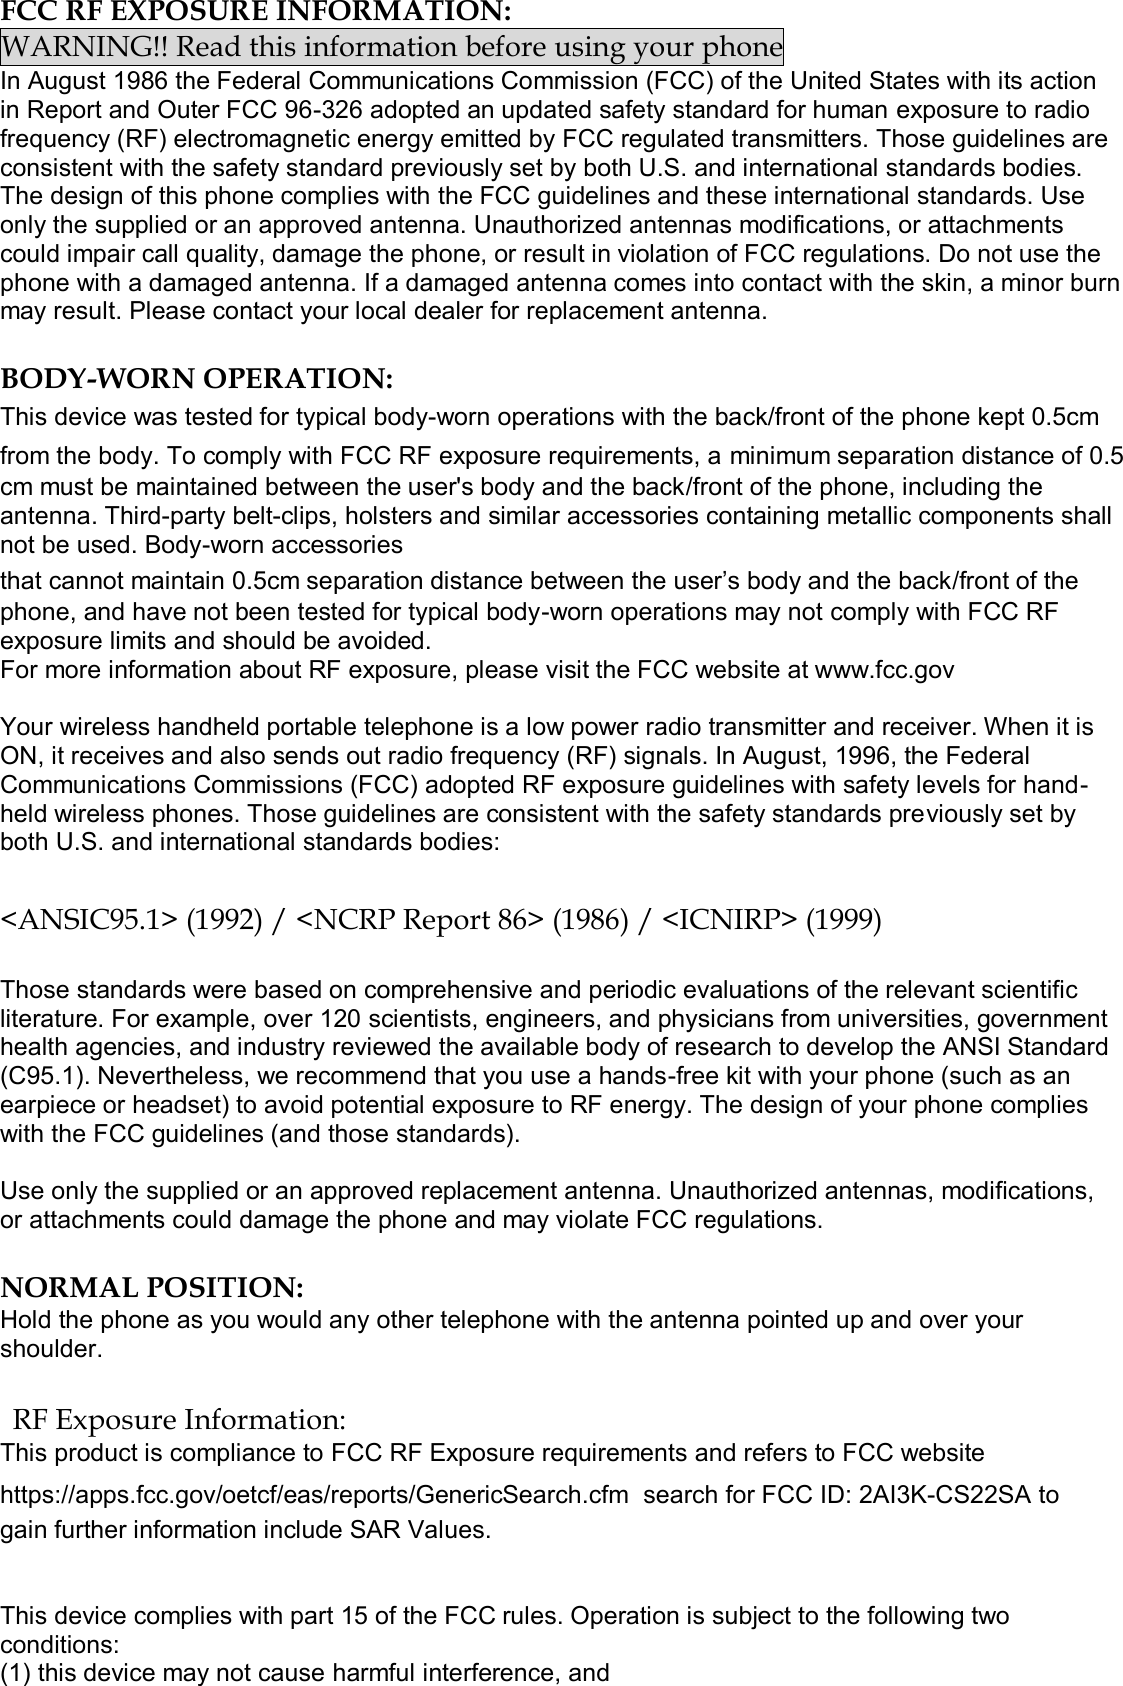  FCC RF EXPOSURE INFORMATION: WARNING!! Read this information before using your phone In August 1986 the Federal Communications Commission (FCC) of the United States with its action in Report and Outer FCC 96-326 adopted an updated safety standard for human exposure to radio frequency (RF) electromagnetic energy emitted by FCC regulated transmitters. Those guidelines are consistent with the safety standard previously set by both U.S. and international standards bodies. The design of this phone complies with the FCC guidelines and these international standards. Use only the supplied or an approved antenna. Unauthorized antennas modifications, or attachments could impair call quality, damage the phone, or result in violation of FCC regulations. Do not use the phone with a damaged antenna. If a damaged antenna comes into contact with the skin, a minor burn may result. Please contact your local dealer for replacement antenna.  BODY-WORN OPERATION: This device was tested for typical body-worn operations with the back/front of the phone kept 0.5cm from the body. To comply with FCC RF exposure requirements, a minimum separation distance of 0.5cm must be maintained between the user&apos;s body and the back/front of the phone, including the antenna. Third-party belt-clips, holsters and similar accessories containing metallic components shall not be used. Body-worn accessories that cannot maintain 0.5cm separation distance between the user’s body and the back/front of the phone, and have not been tested for typical body-worn operations may not comply with FCC RF exposure limits and should be avoided. For more information about RF exposure, please visit the FCC website at www.fcc.gov  Your wireless handheld portable telephone is a low power radio transmitter and receiver. When it is ON, it receives and also sends out radio frequency (RF) signals. In August, 1996, the Federal Communications Commissions (FCC) adopted RF exposure guidelines with safety levels for hand-held wireless phones. Those guidelines are consistent with the safety standards previously set by both U.S. and international standards bodies:  &lt;ANSIC95.1&gt; (1992) / &lt;NCRP Report 86&gt; (1986) / &lt;ICNIRP&gt; (1999)  Those standards were based on comprehensive and periodic evaluations of the relevant scientific literature. For example, over 120 scientists, engineers, and physicians from universities, government health agencies, and industry reviewed the available body of research to develop the ANSI Standard (C95.1). Nevertheless, we recommend that you use a hands-free kit with your phone (such as an earpiece or headset) to avoid potential exposure to RF energy. The design of your phone complies with the FCC guidelines (and those standards).  Use only the supplied or an approved replacement antenna. Unauthorized antennas, modifications, or attachments could damage the phone and may violate FCC regulations.   NORMAL POSITION:  Hold the phone as you would any other telephone with the antenna pointed up and over your shoulder.  RF Exposure Information: This product is compliance to FCC RF Exposure requirements and refers to FCC website https://apps.fcc.gov/oetcf/eas/reports/GenericSearch.cfm  search for FCC ID: 2AI3K-CS22SA to gain further information include SAR Values.    This device complies with part 15 of the FCC rules. Operation is subject to the following two conditions: (1) this device may not cause harmful interference, and 